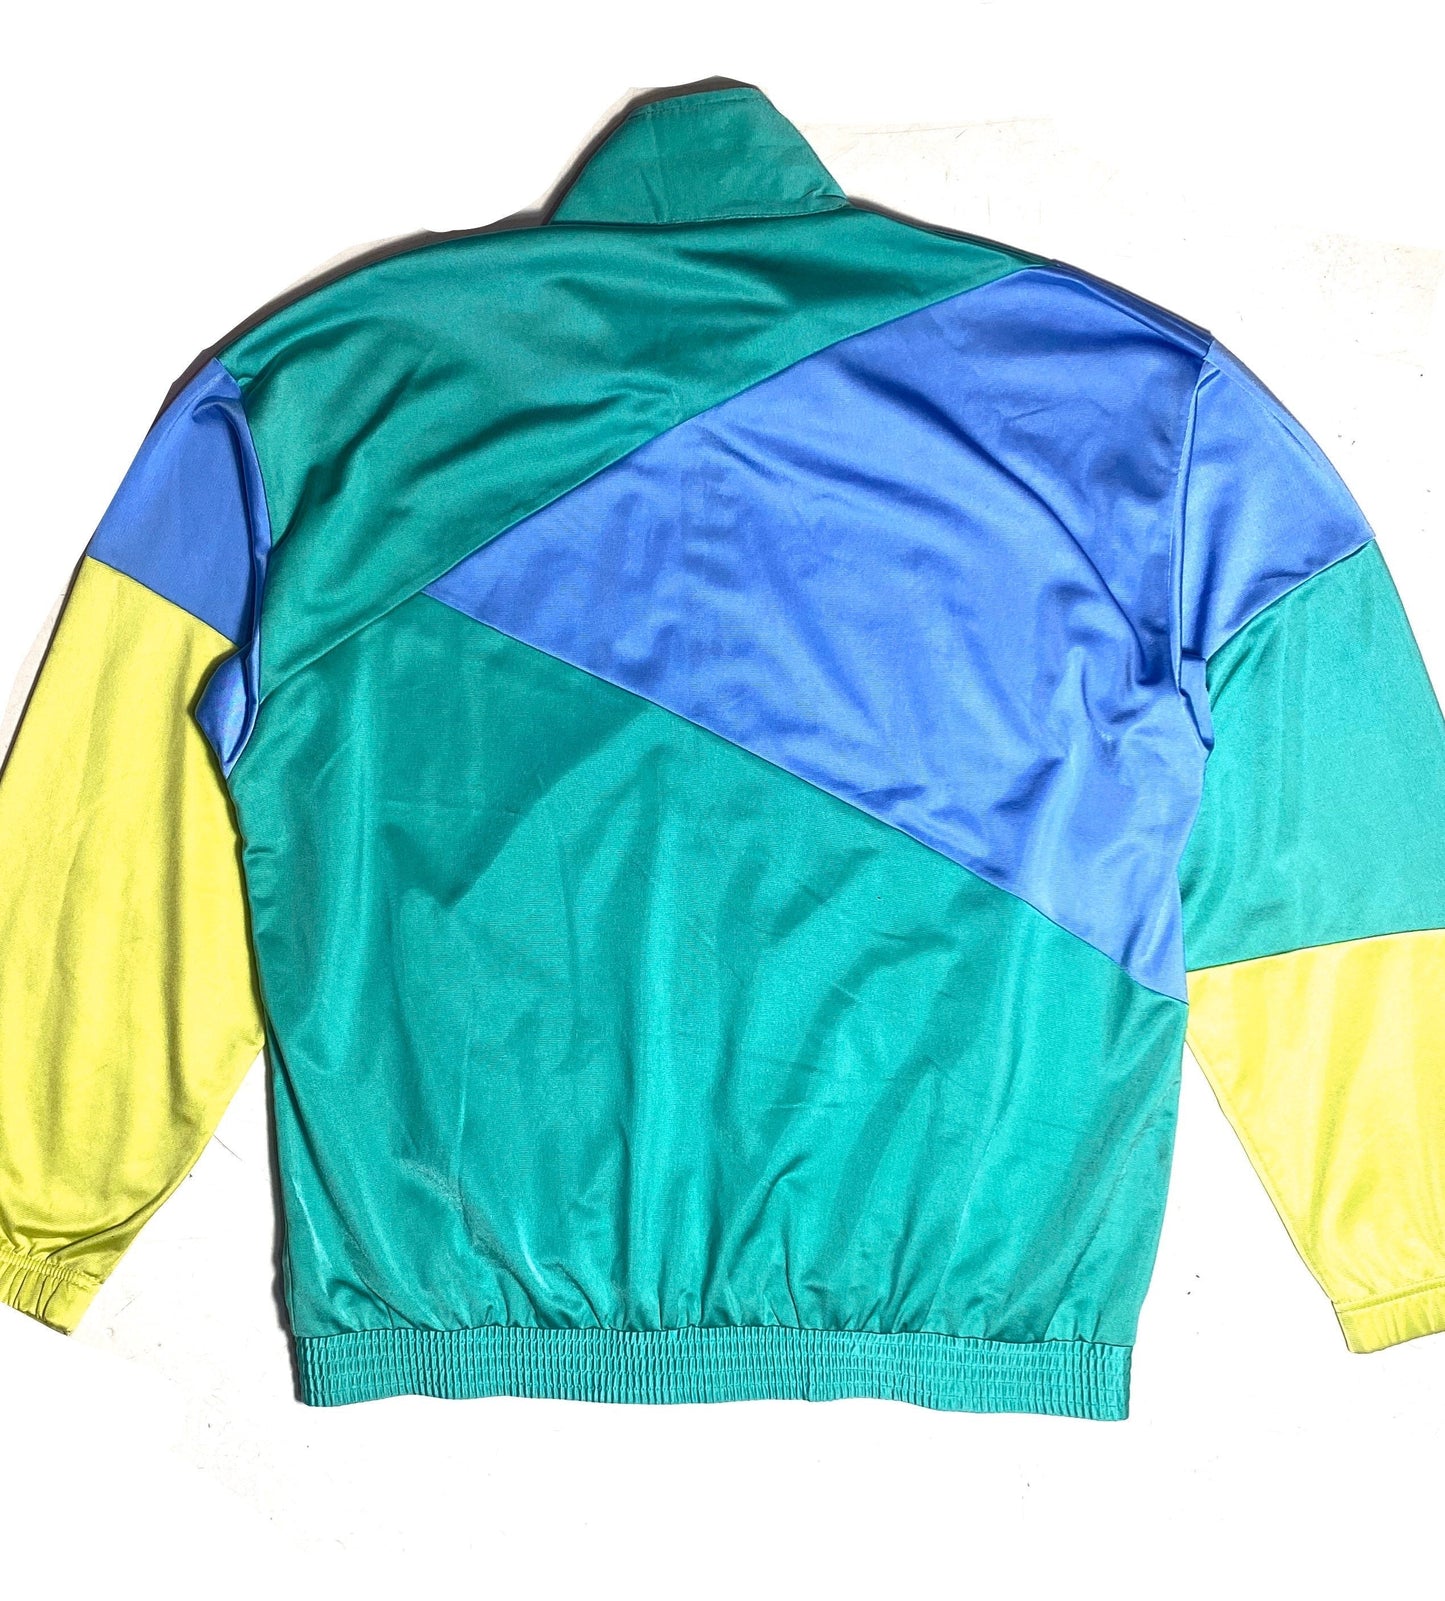 Sergio Tacchini 90s colorful patchwork tracktop jacket with embroidered details, Mint condition.